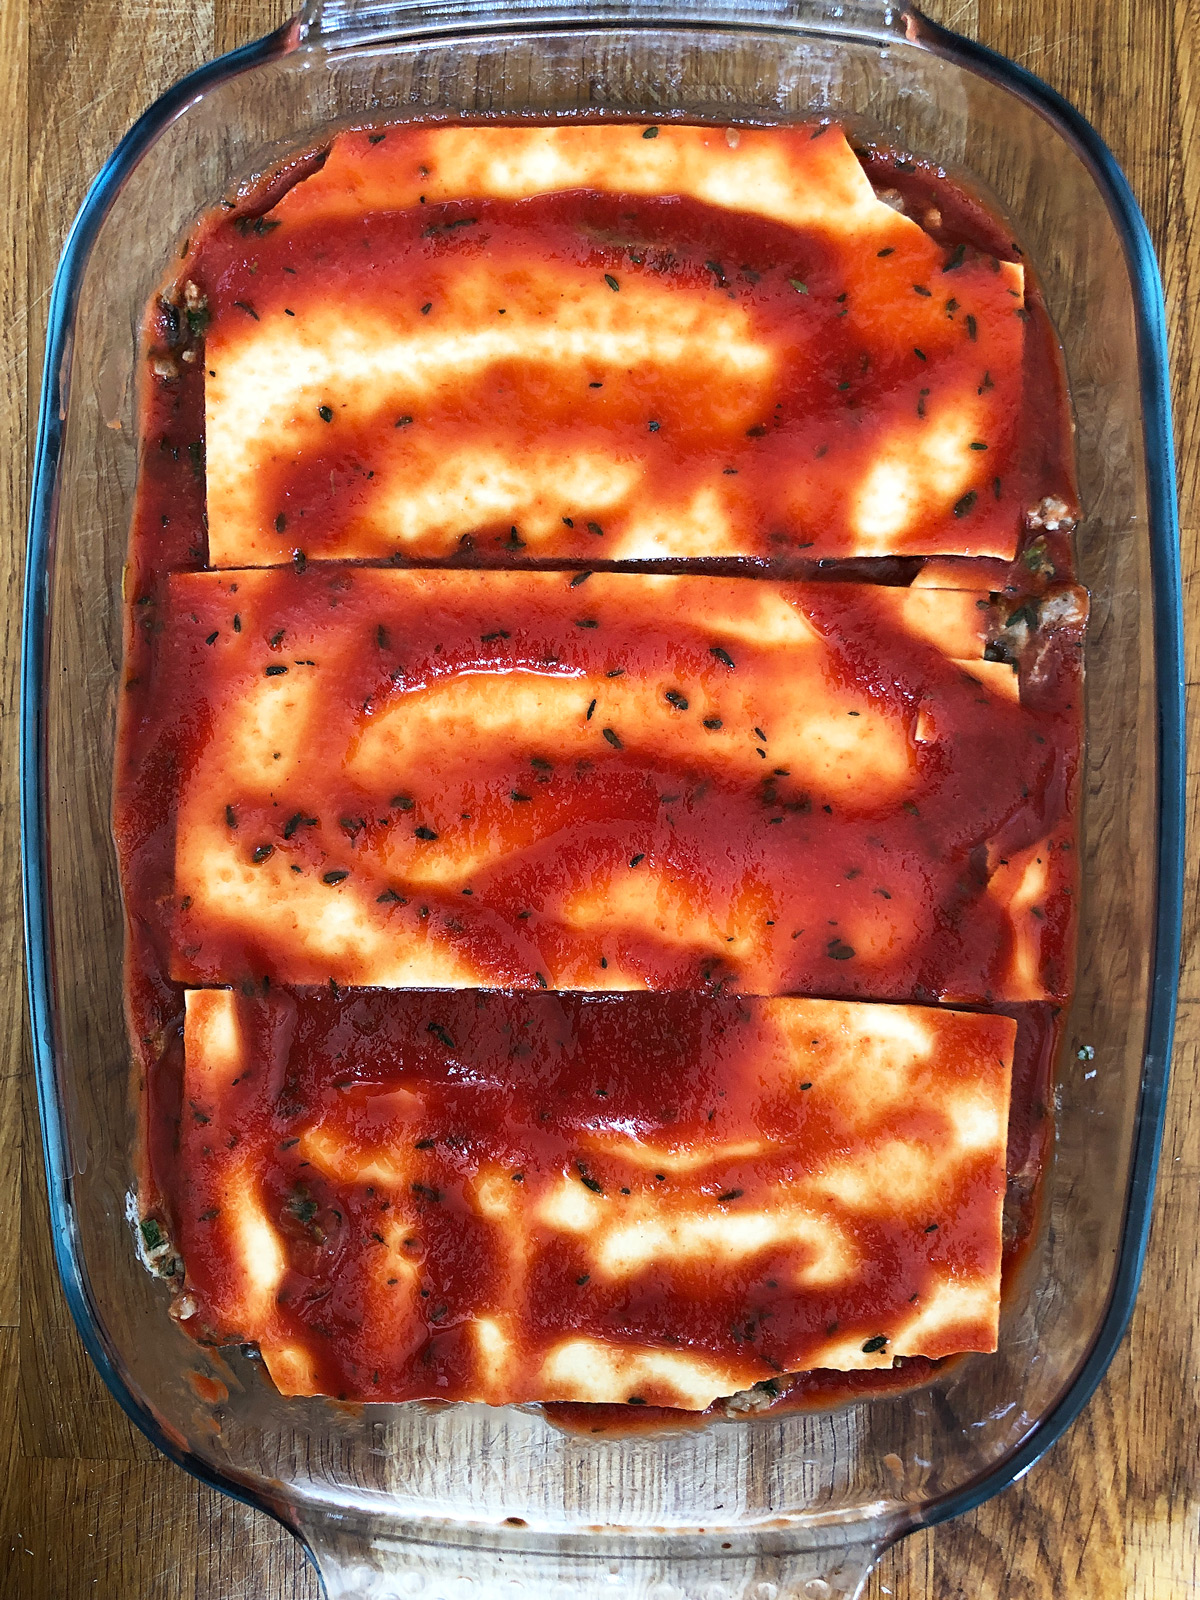 Assembling lasagne - dried lasagne sheets covered with tomato sauce in a glass oven dish.